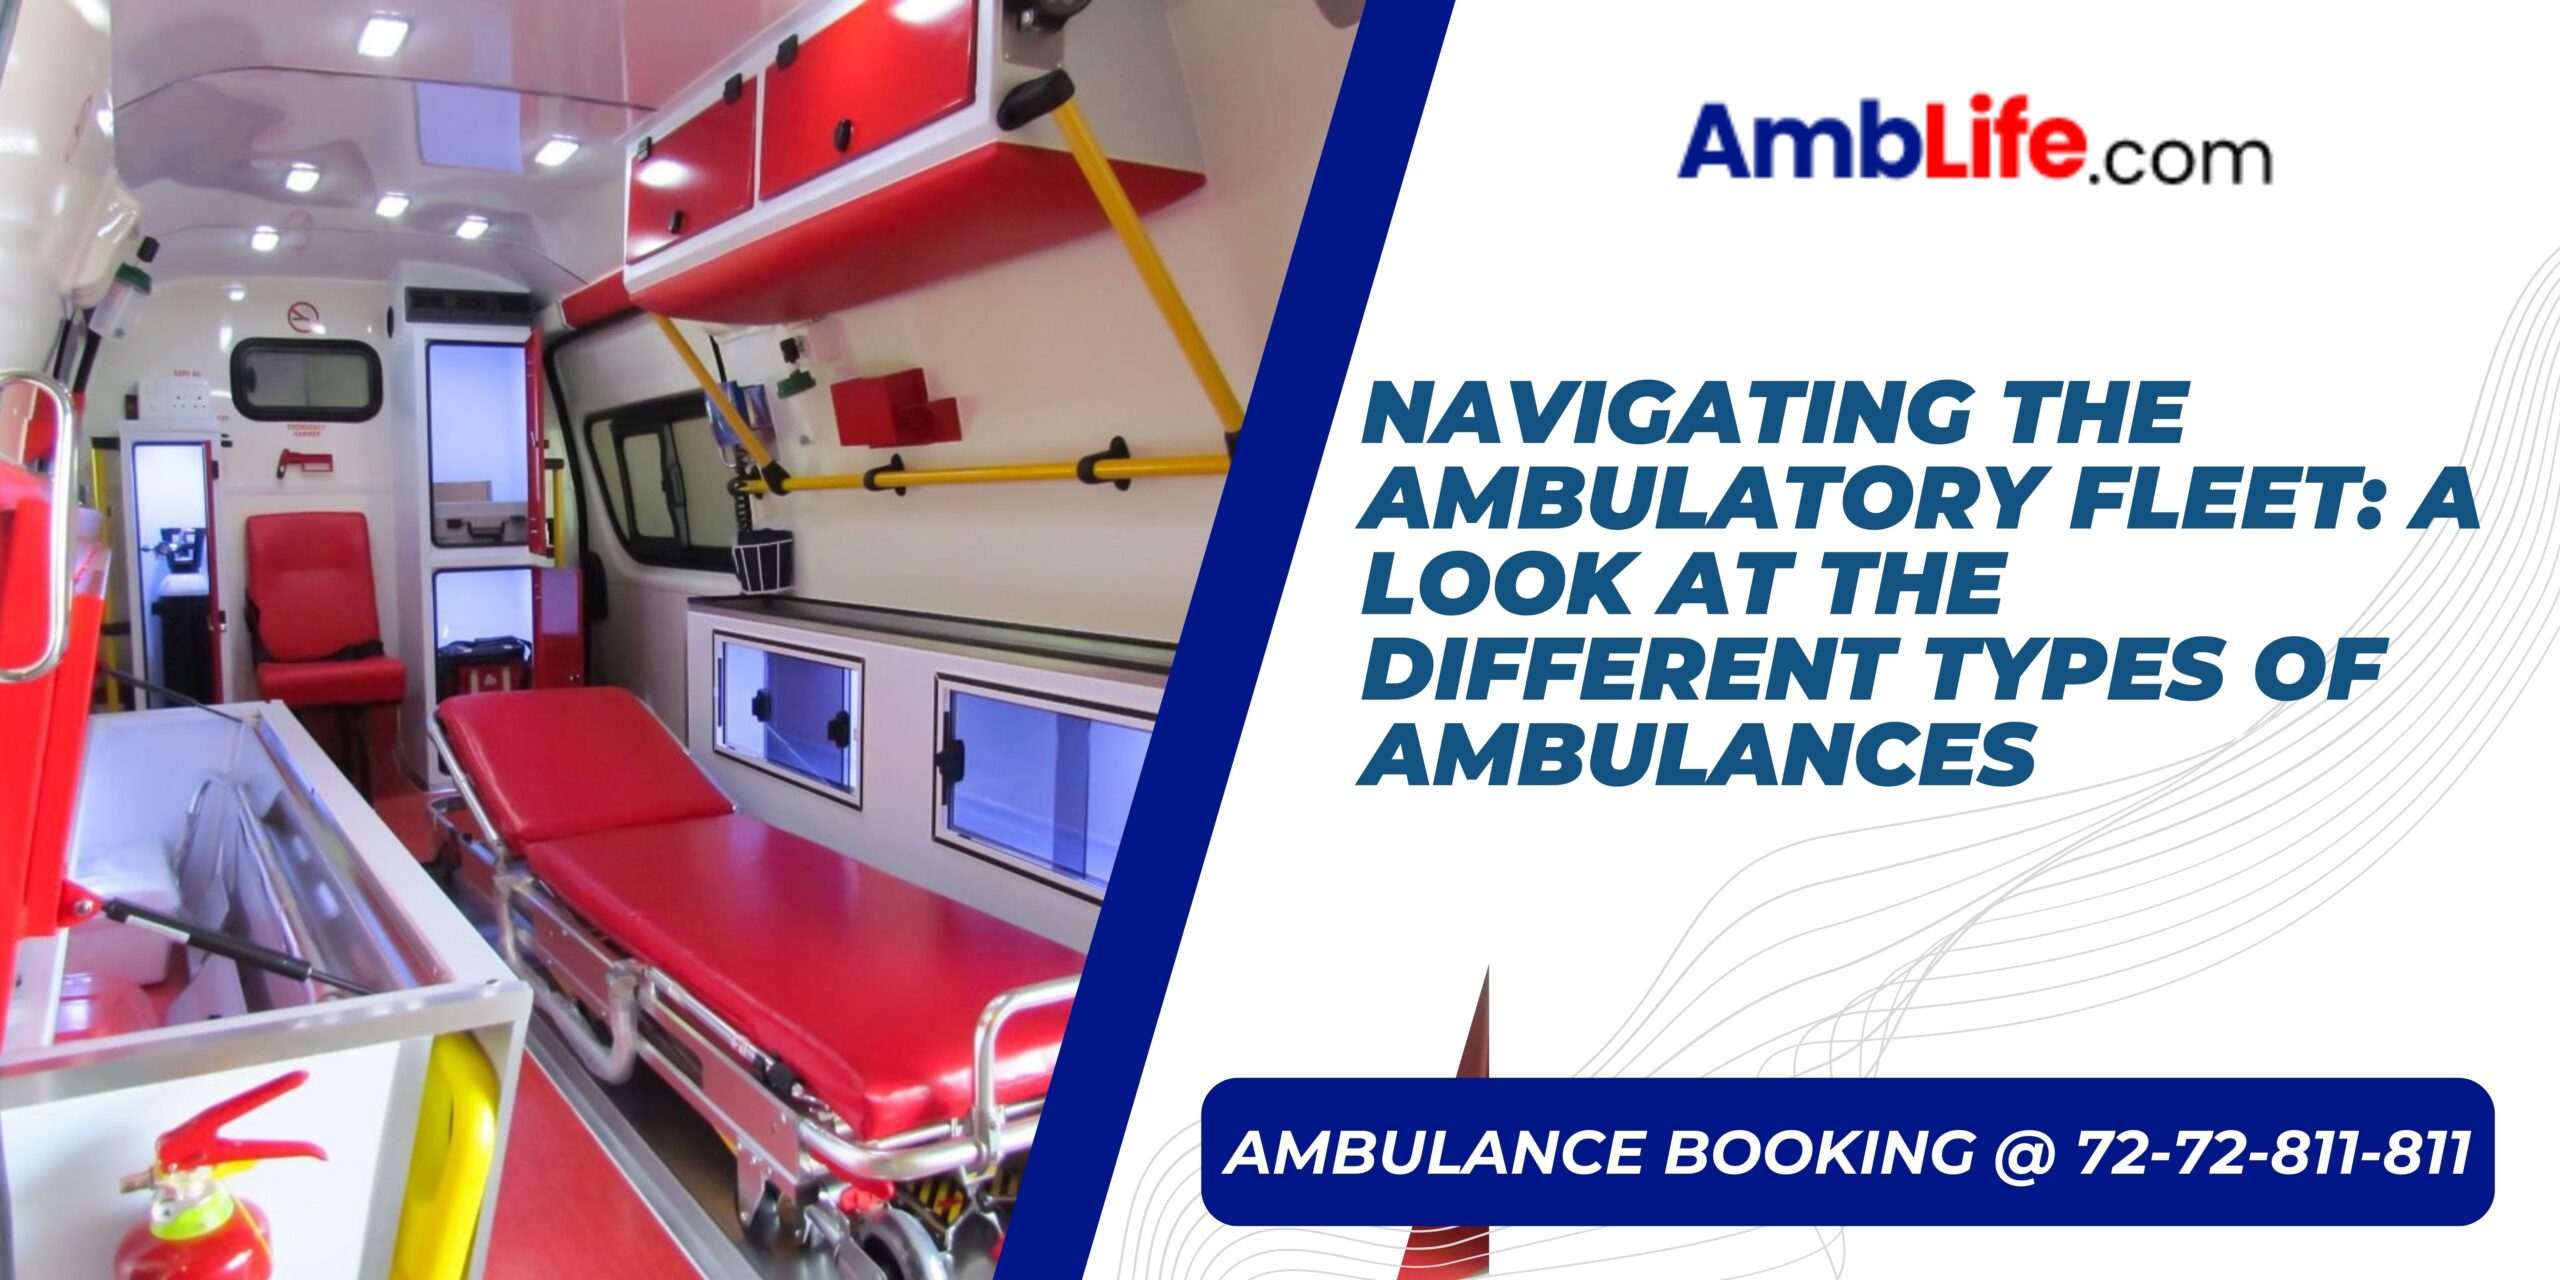 Navigating the Ambulatory Fleet: A Look at the Different Types of Ambulances